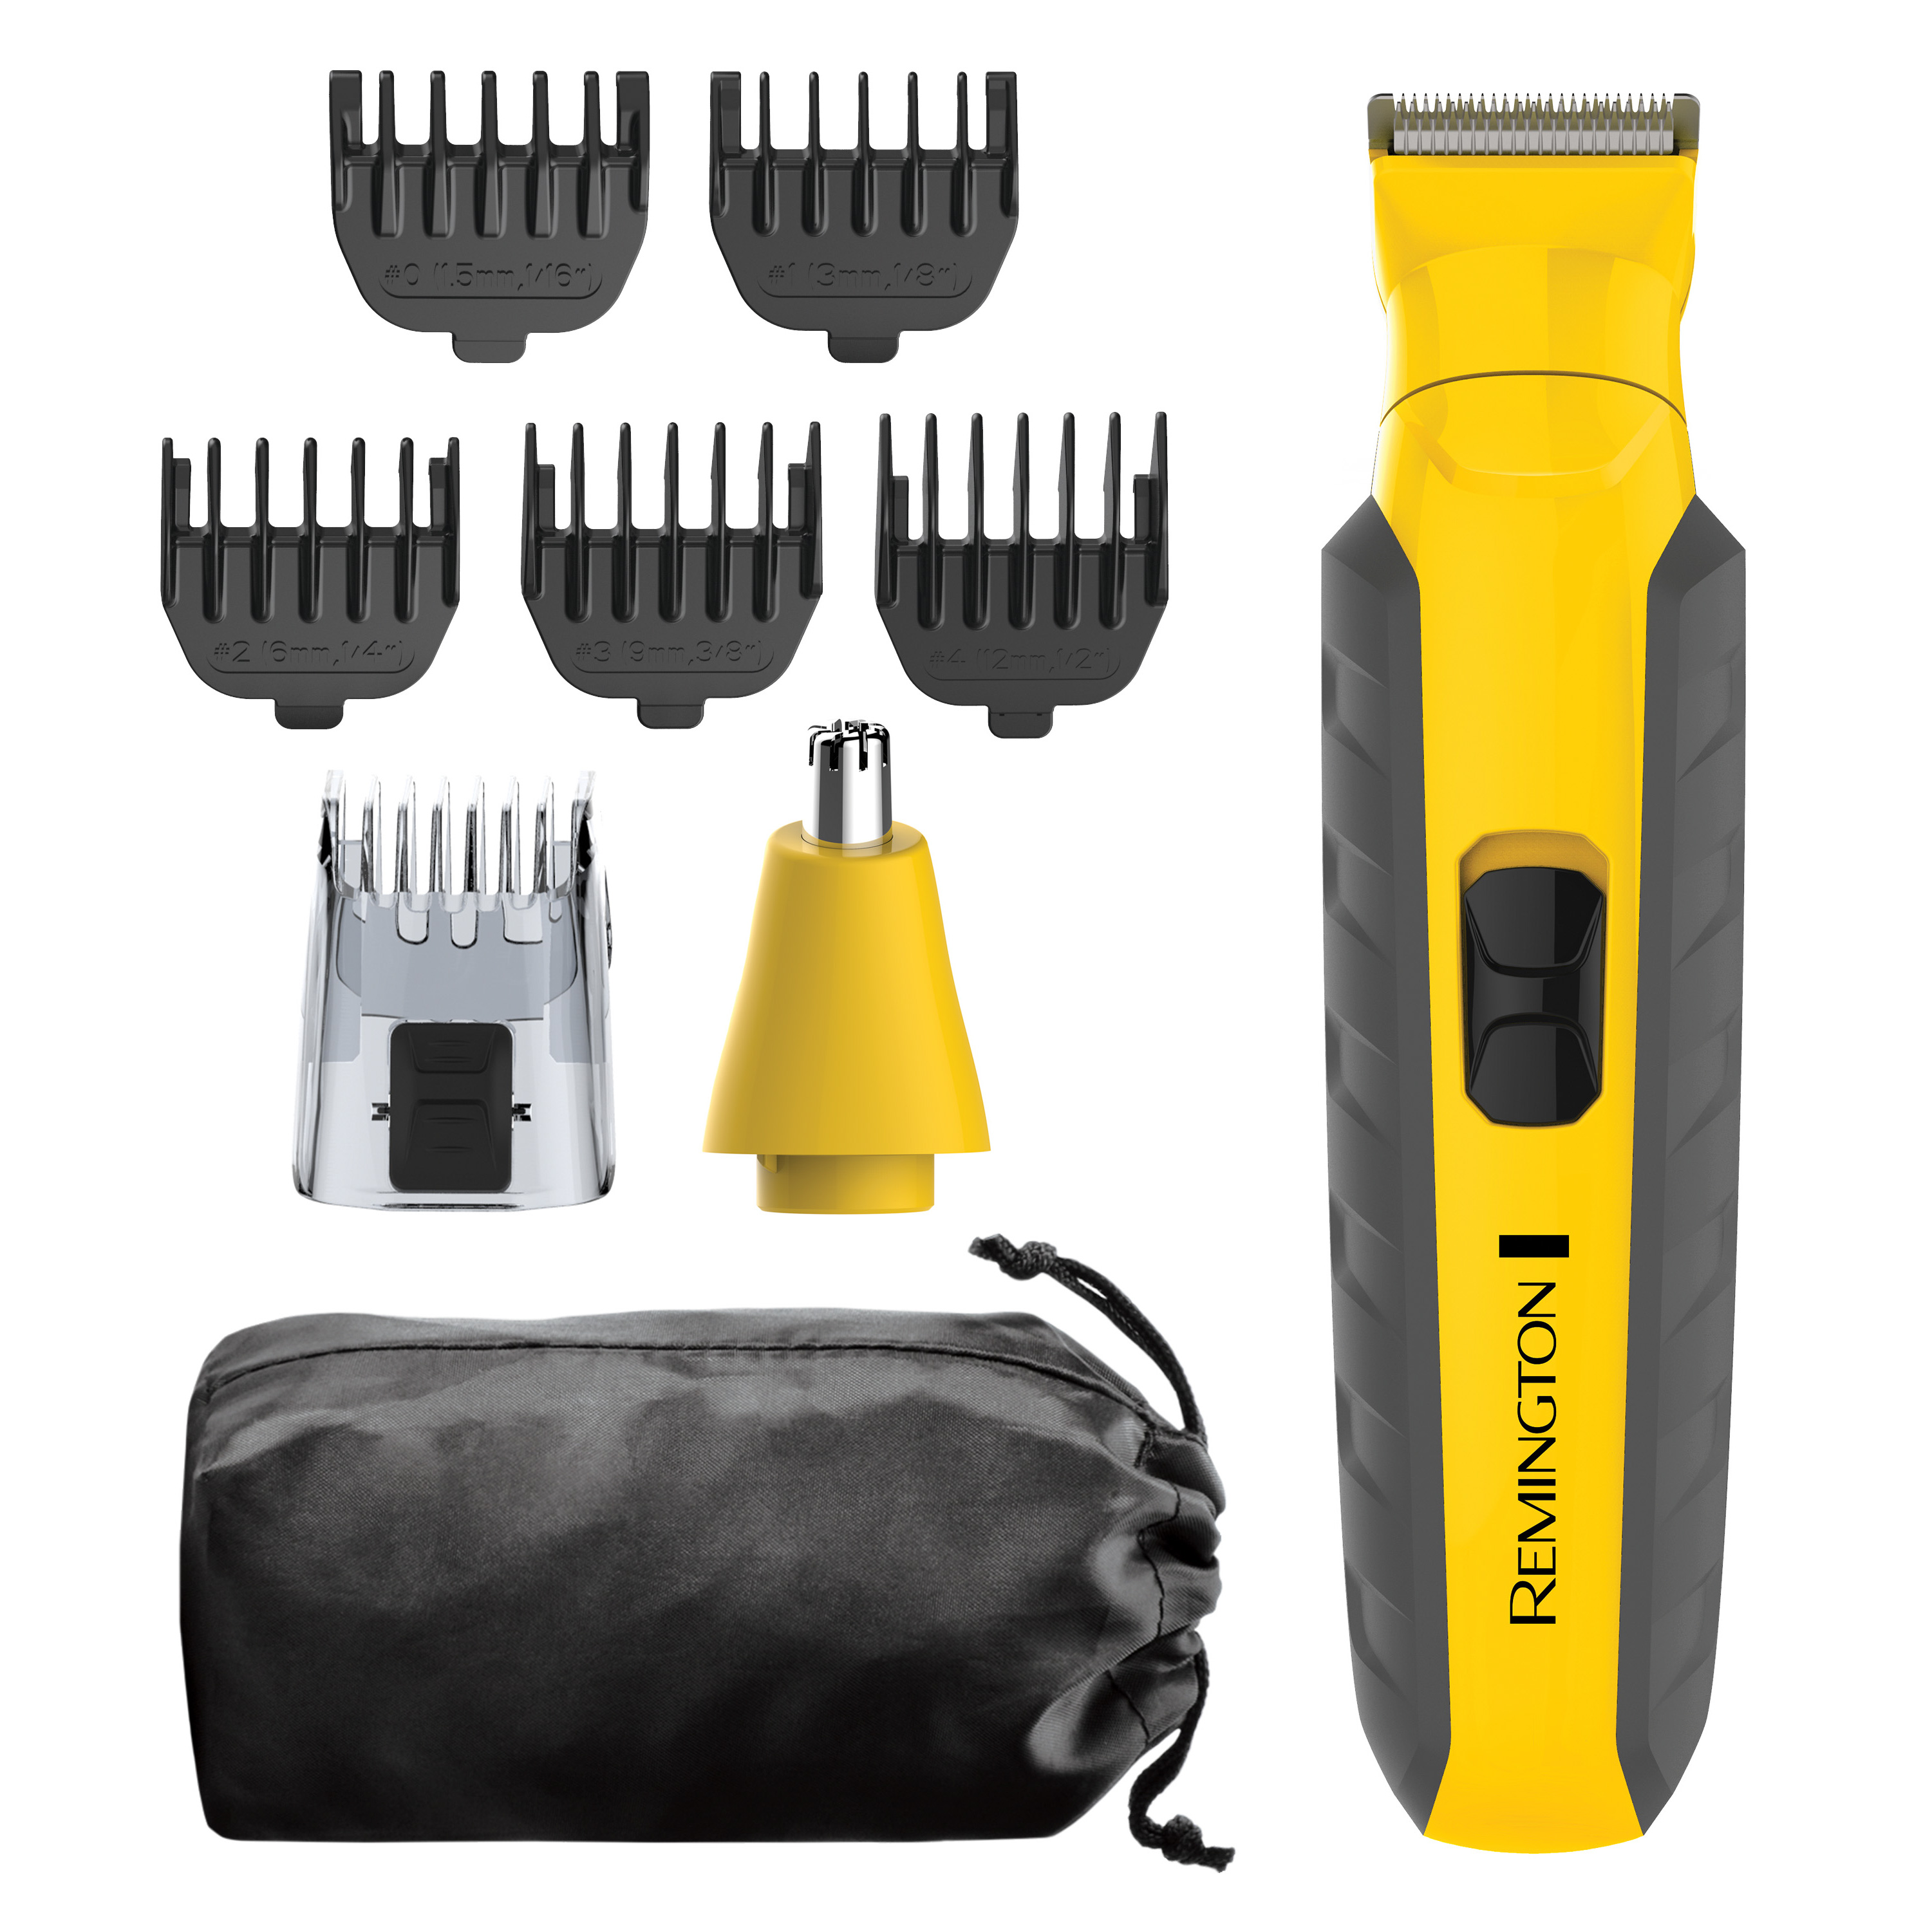 Remington Virtually Indestructible All-in-One Grooming Kit, Yellow/Black, PG6855A - image 1 of 9